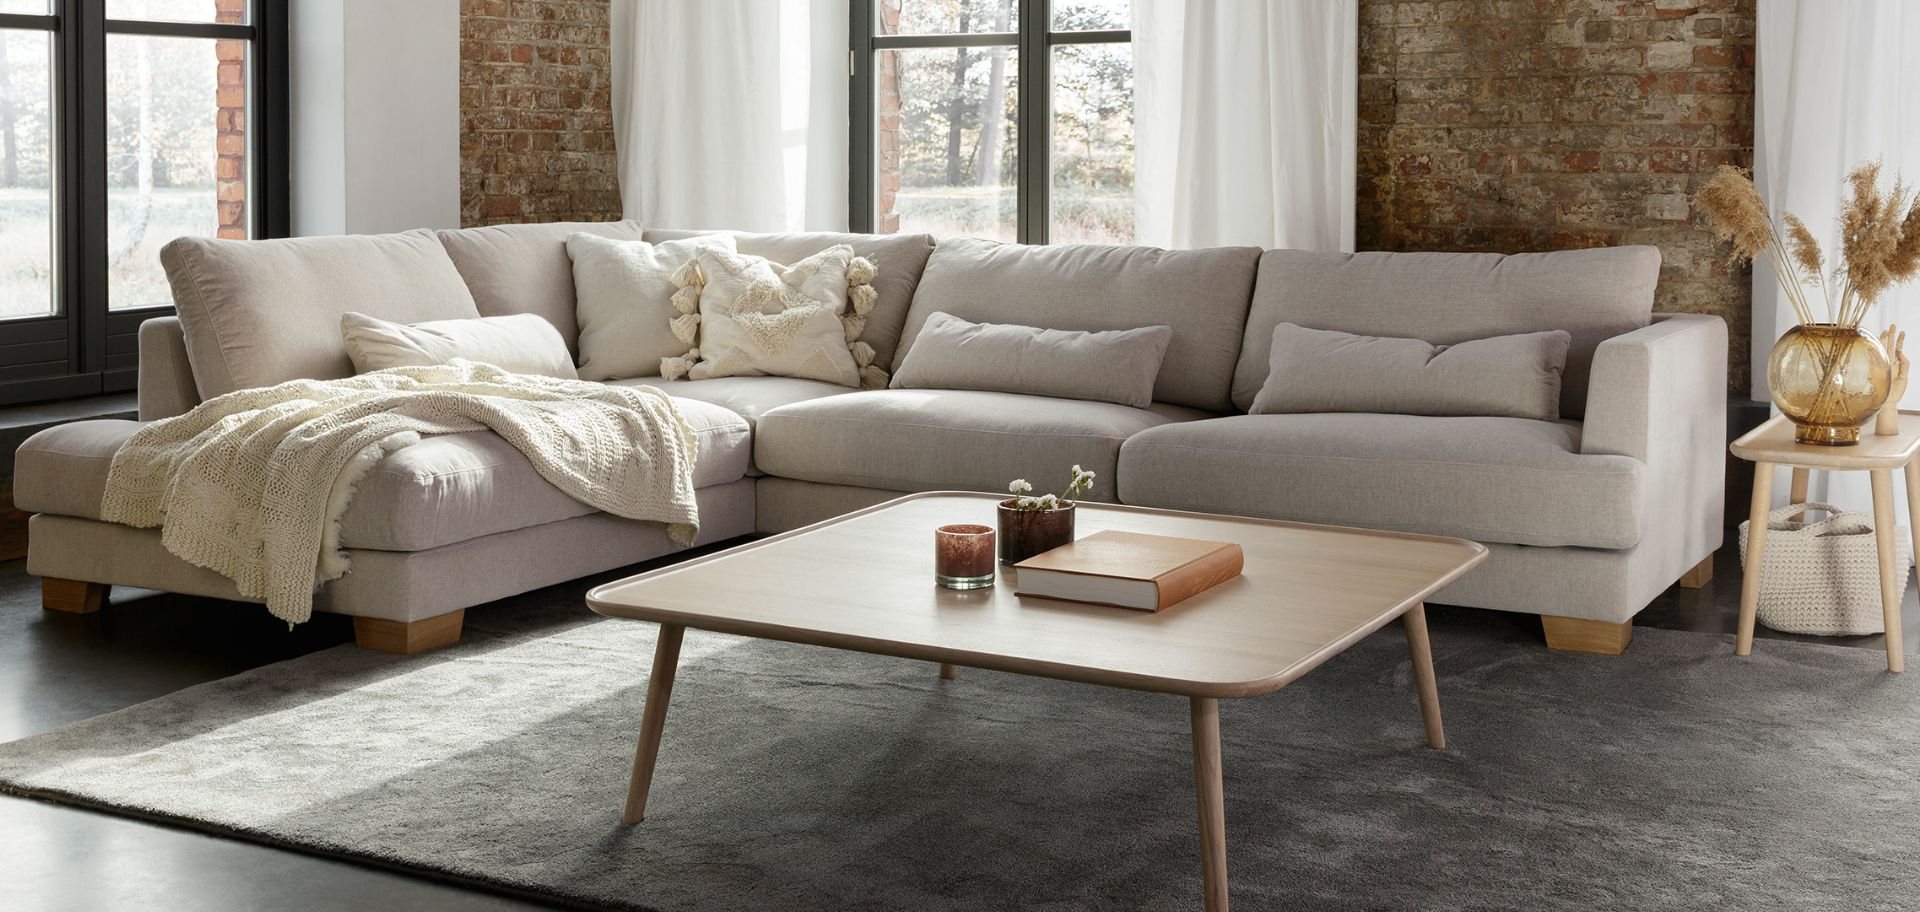 Discover our Superbly Stylish Sofas, Armchairs and Sofa Beds